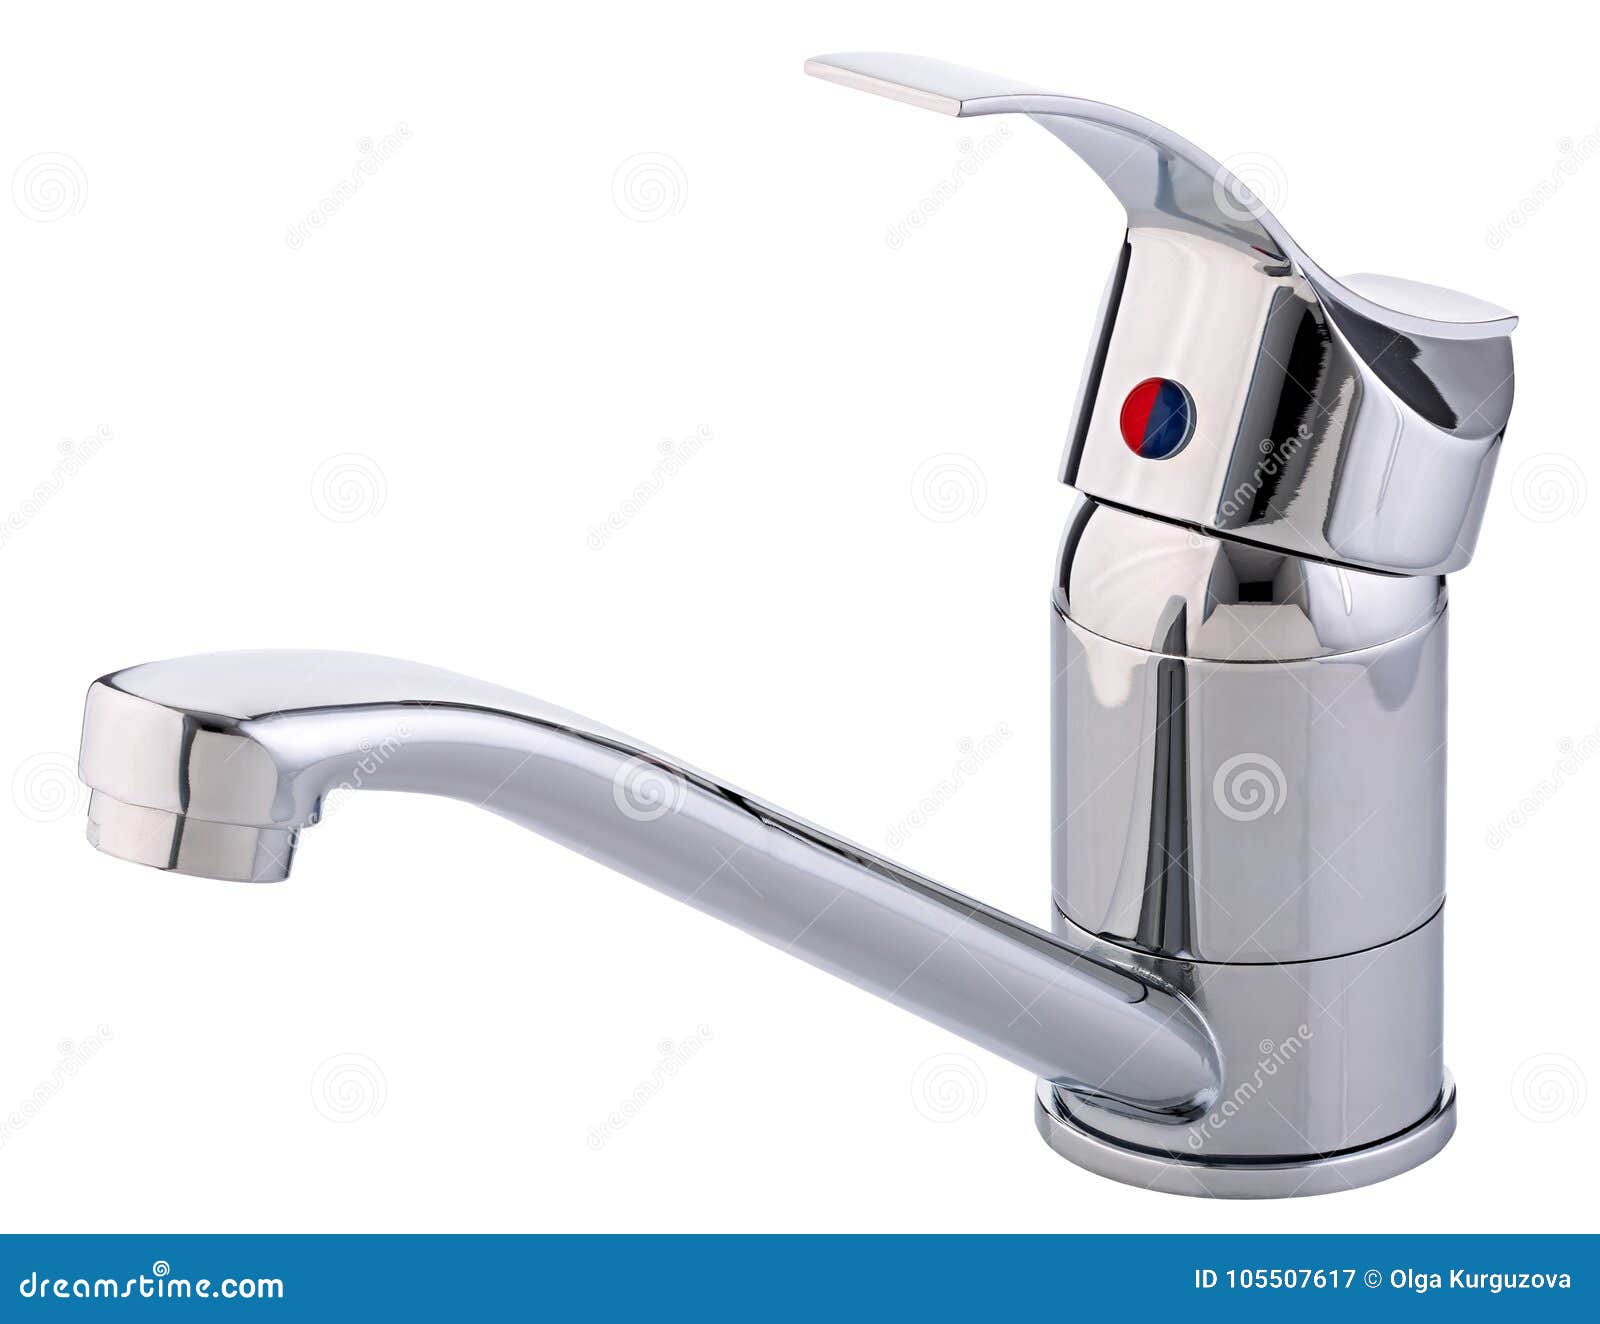 Mixer Cold Hot Water Modern Faucet Bathroom Kitchen Tap I